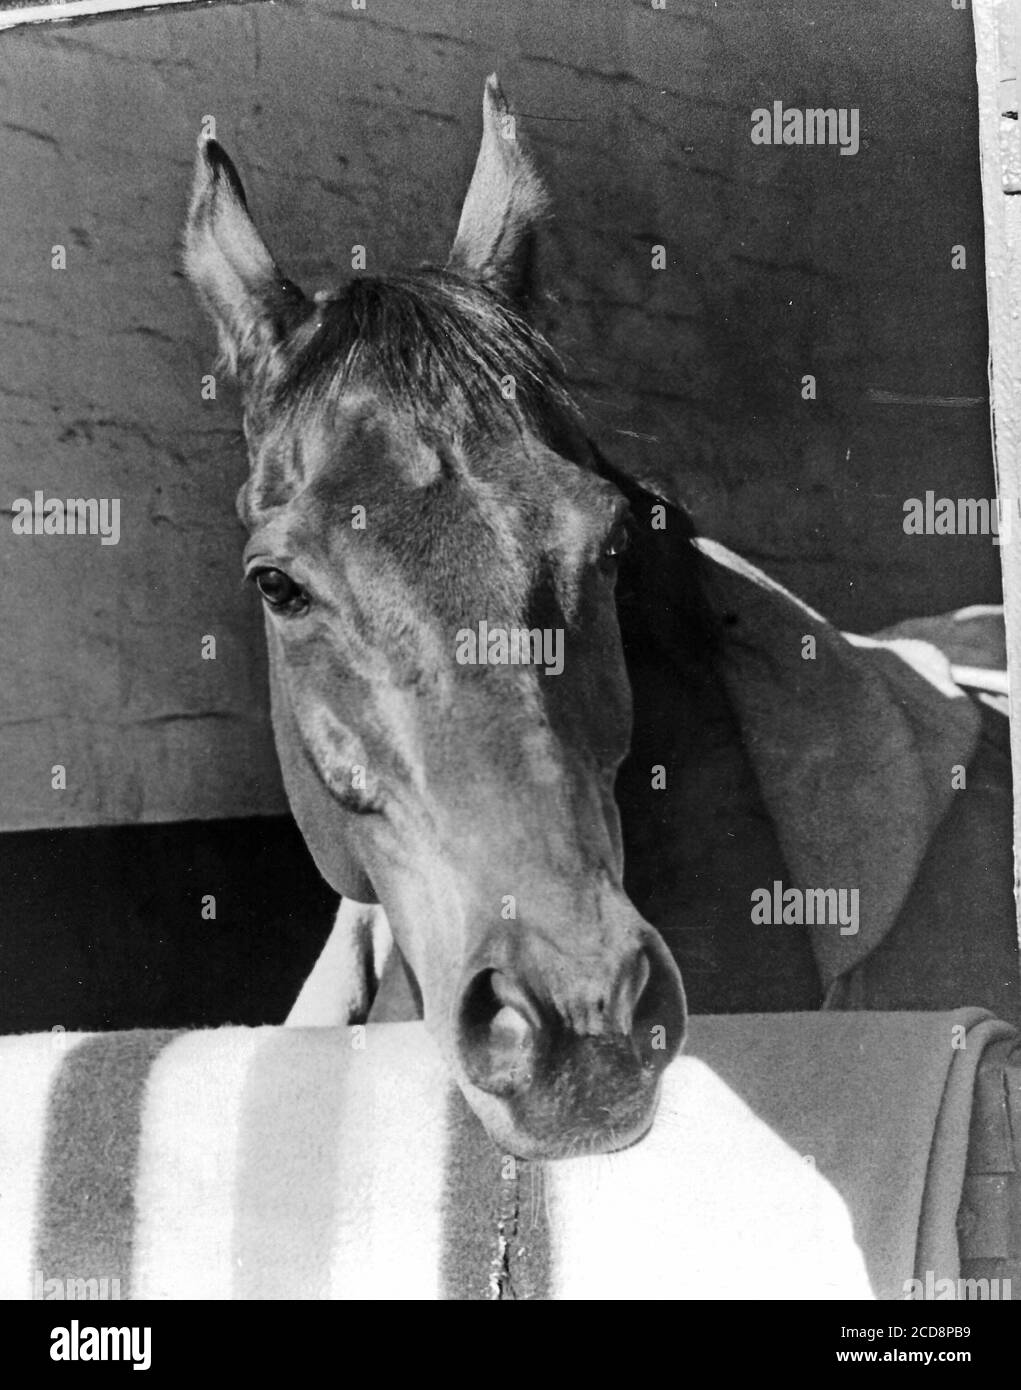 Wonder Horse RED RUM winner of three Grand National Steeplechases having won the event in 1973, 1974, & 1977. The wonder horse was trained by Ginger McCaine and owned by Noel Le Mare and riden by jockey Tommy Stack. Pic by Ray Bradbury Stock Photo